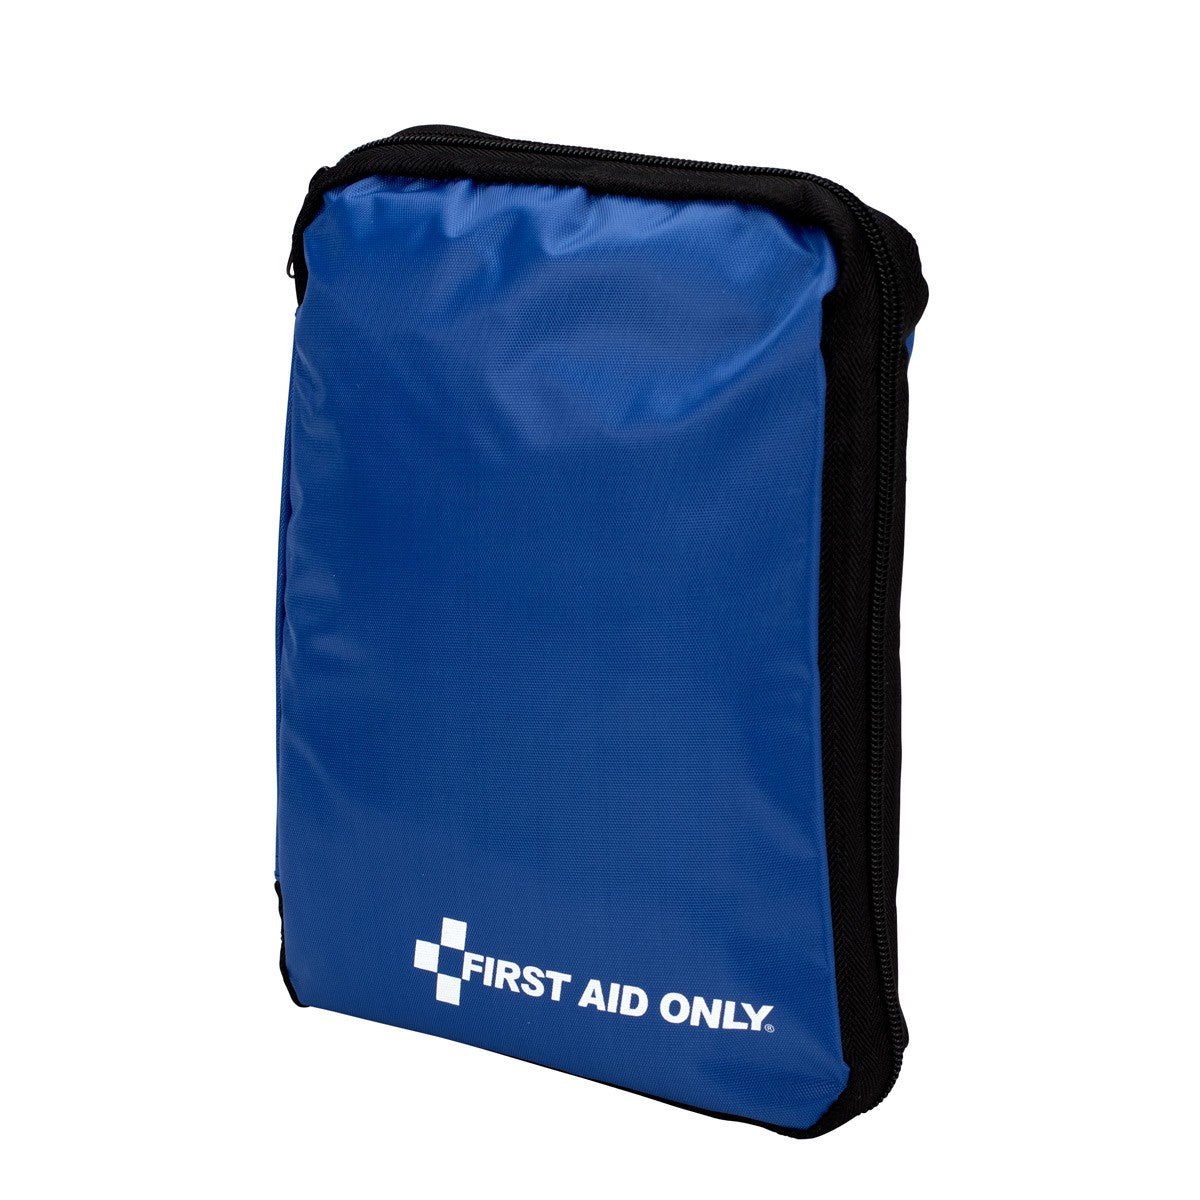 Essentials First Aid Kit, 199 Piece, Fabric Case - W-FAO-432